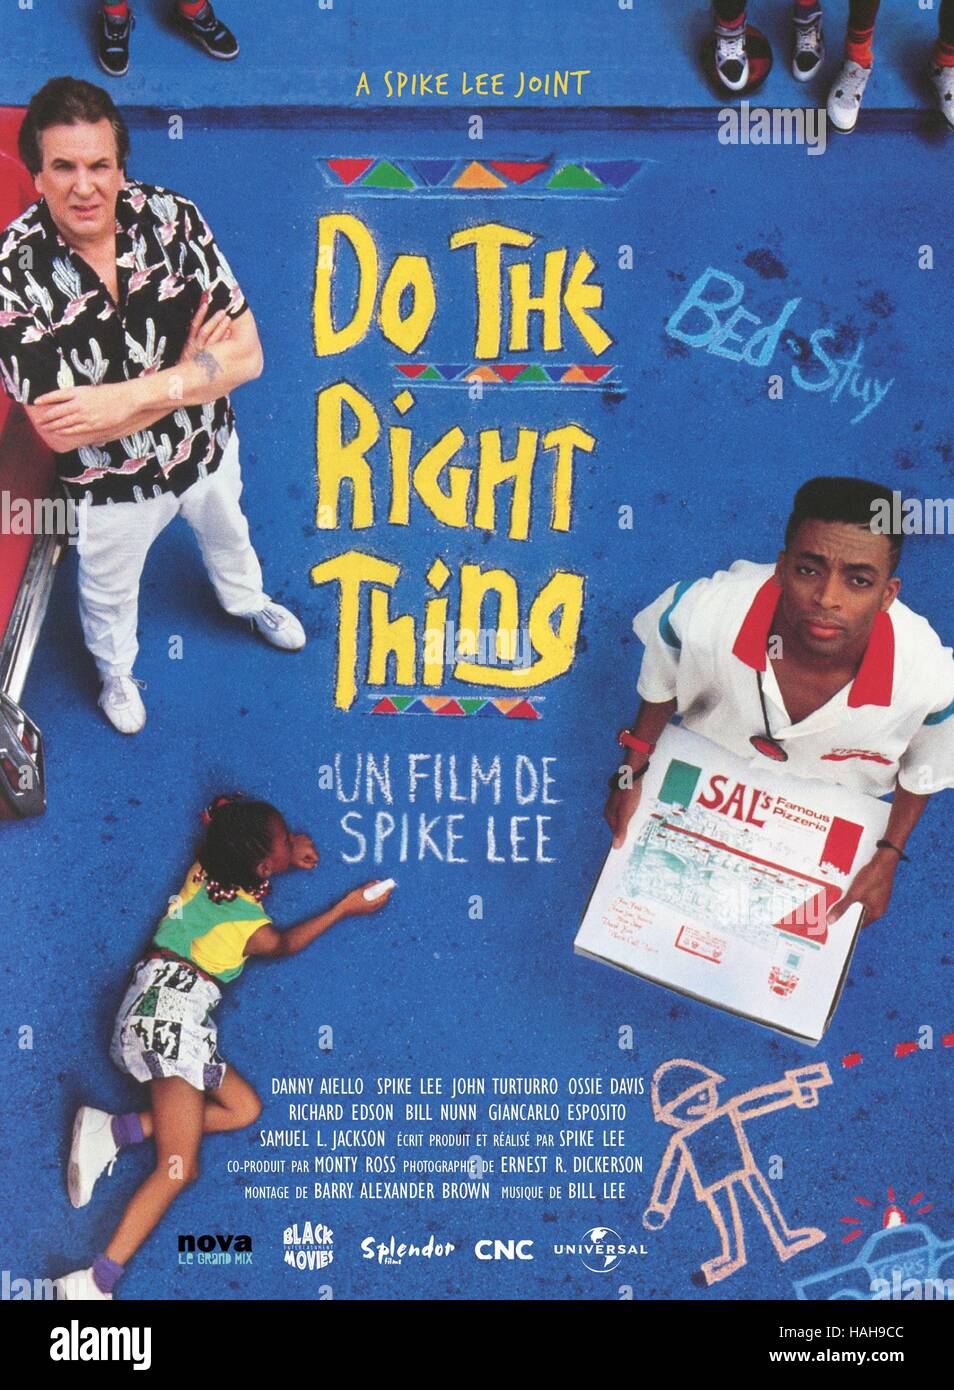 DO THE RIGHT THING (1989) POSTER, US, SIGNED BY SPIKE LEE, Original Film  Posters Online, 2020